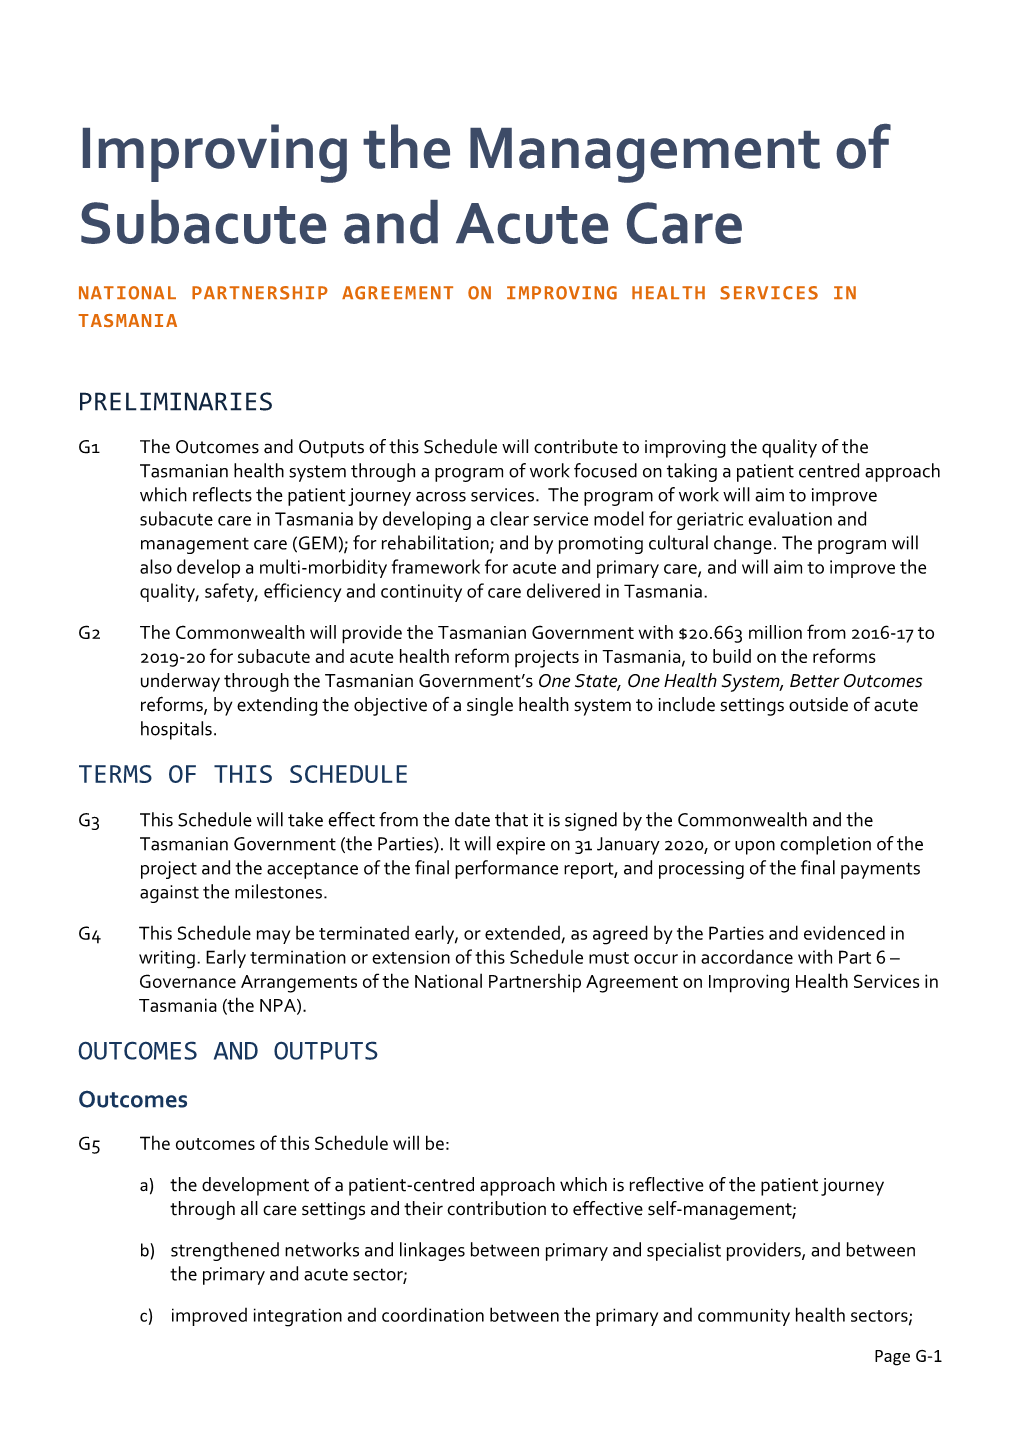 Improving the Management of Subacute and Acute Care